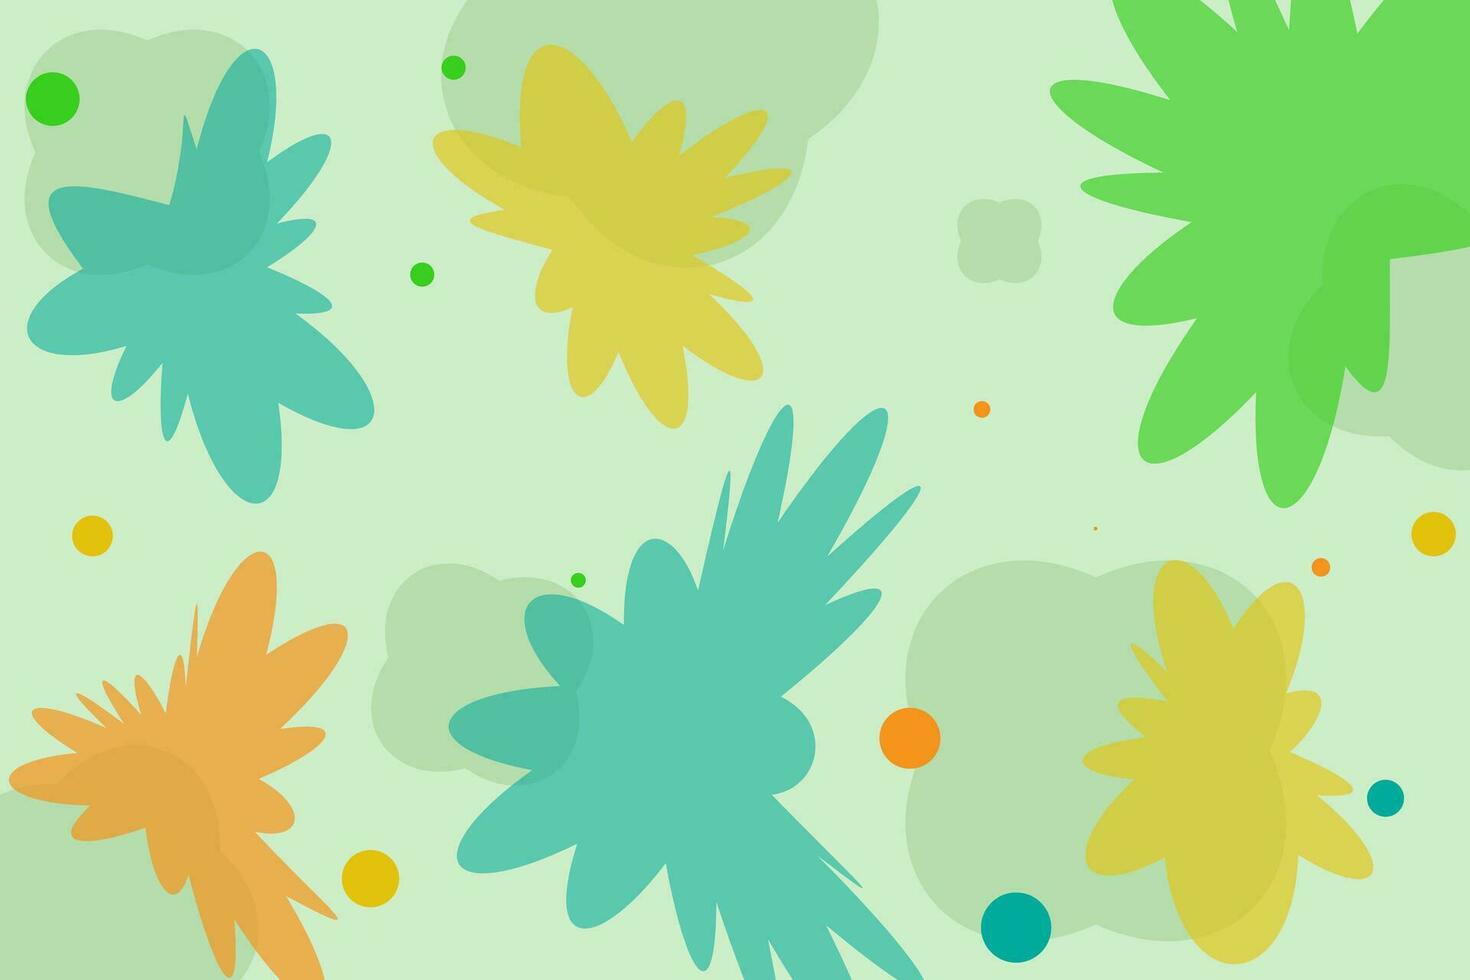 Background Hand drawn organic shapes green natural leaves, floral, line art pattern decoration element of tropical leaves, flowers and branches, decorative abstract art vector seamless